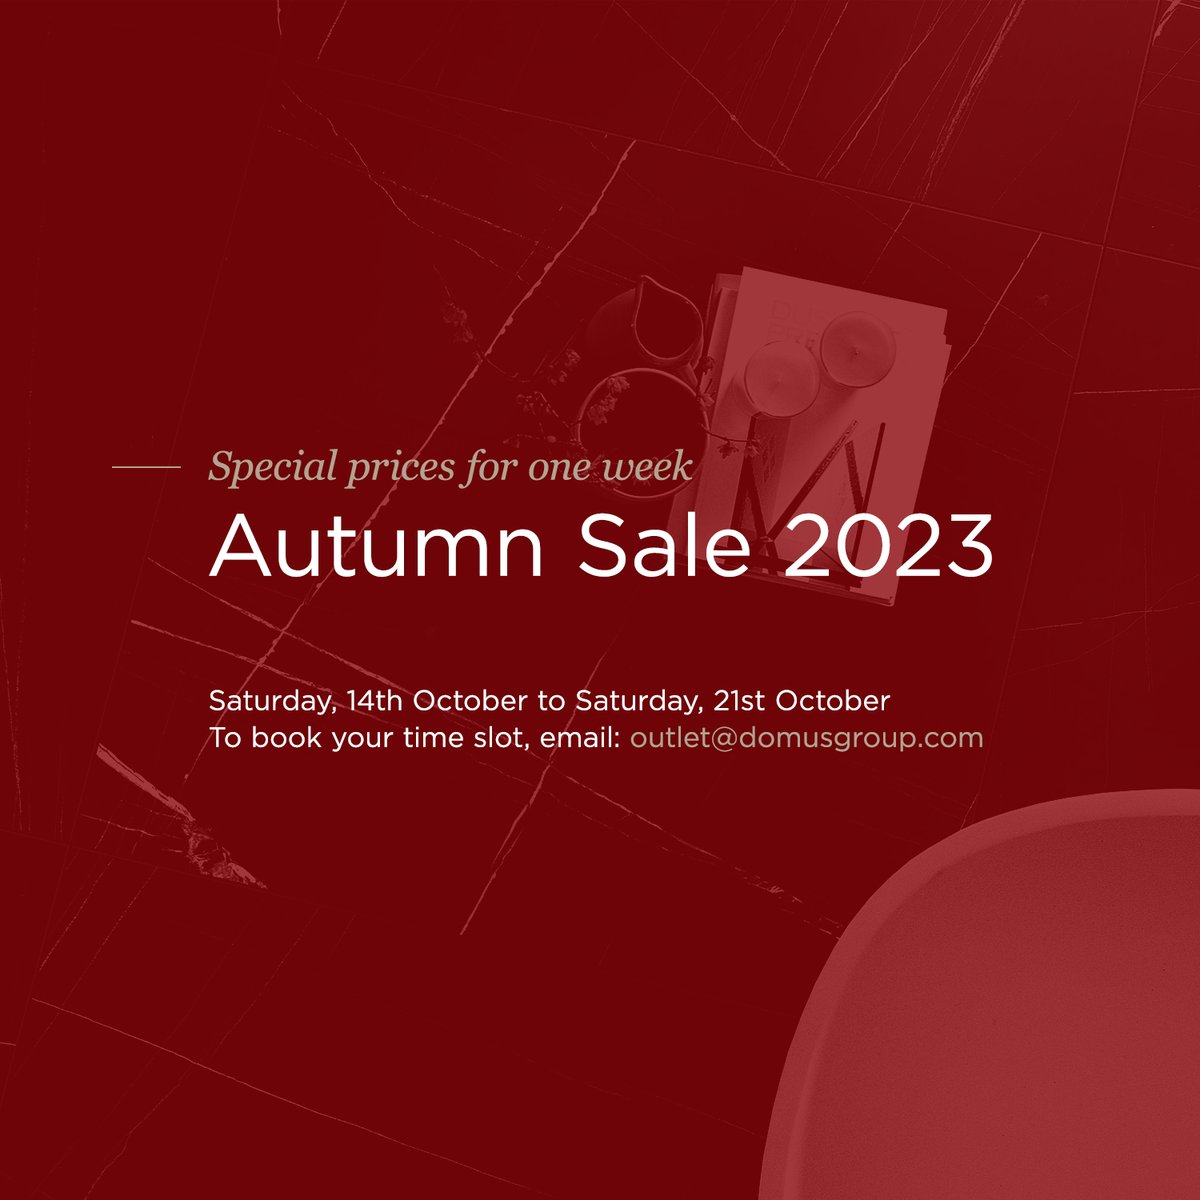 📢For huge savings on high-quality tiles and engineered flooring, don’t miss our big discount Autumn Sale taking place at the @DomusOutlet showroom in Surrey from Saturday 14th – Saturday 21st October. Read more and plan your visit: domusgroup.com/articles/outle…